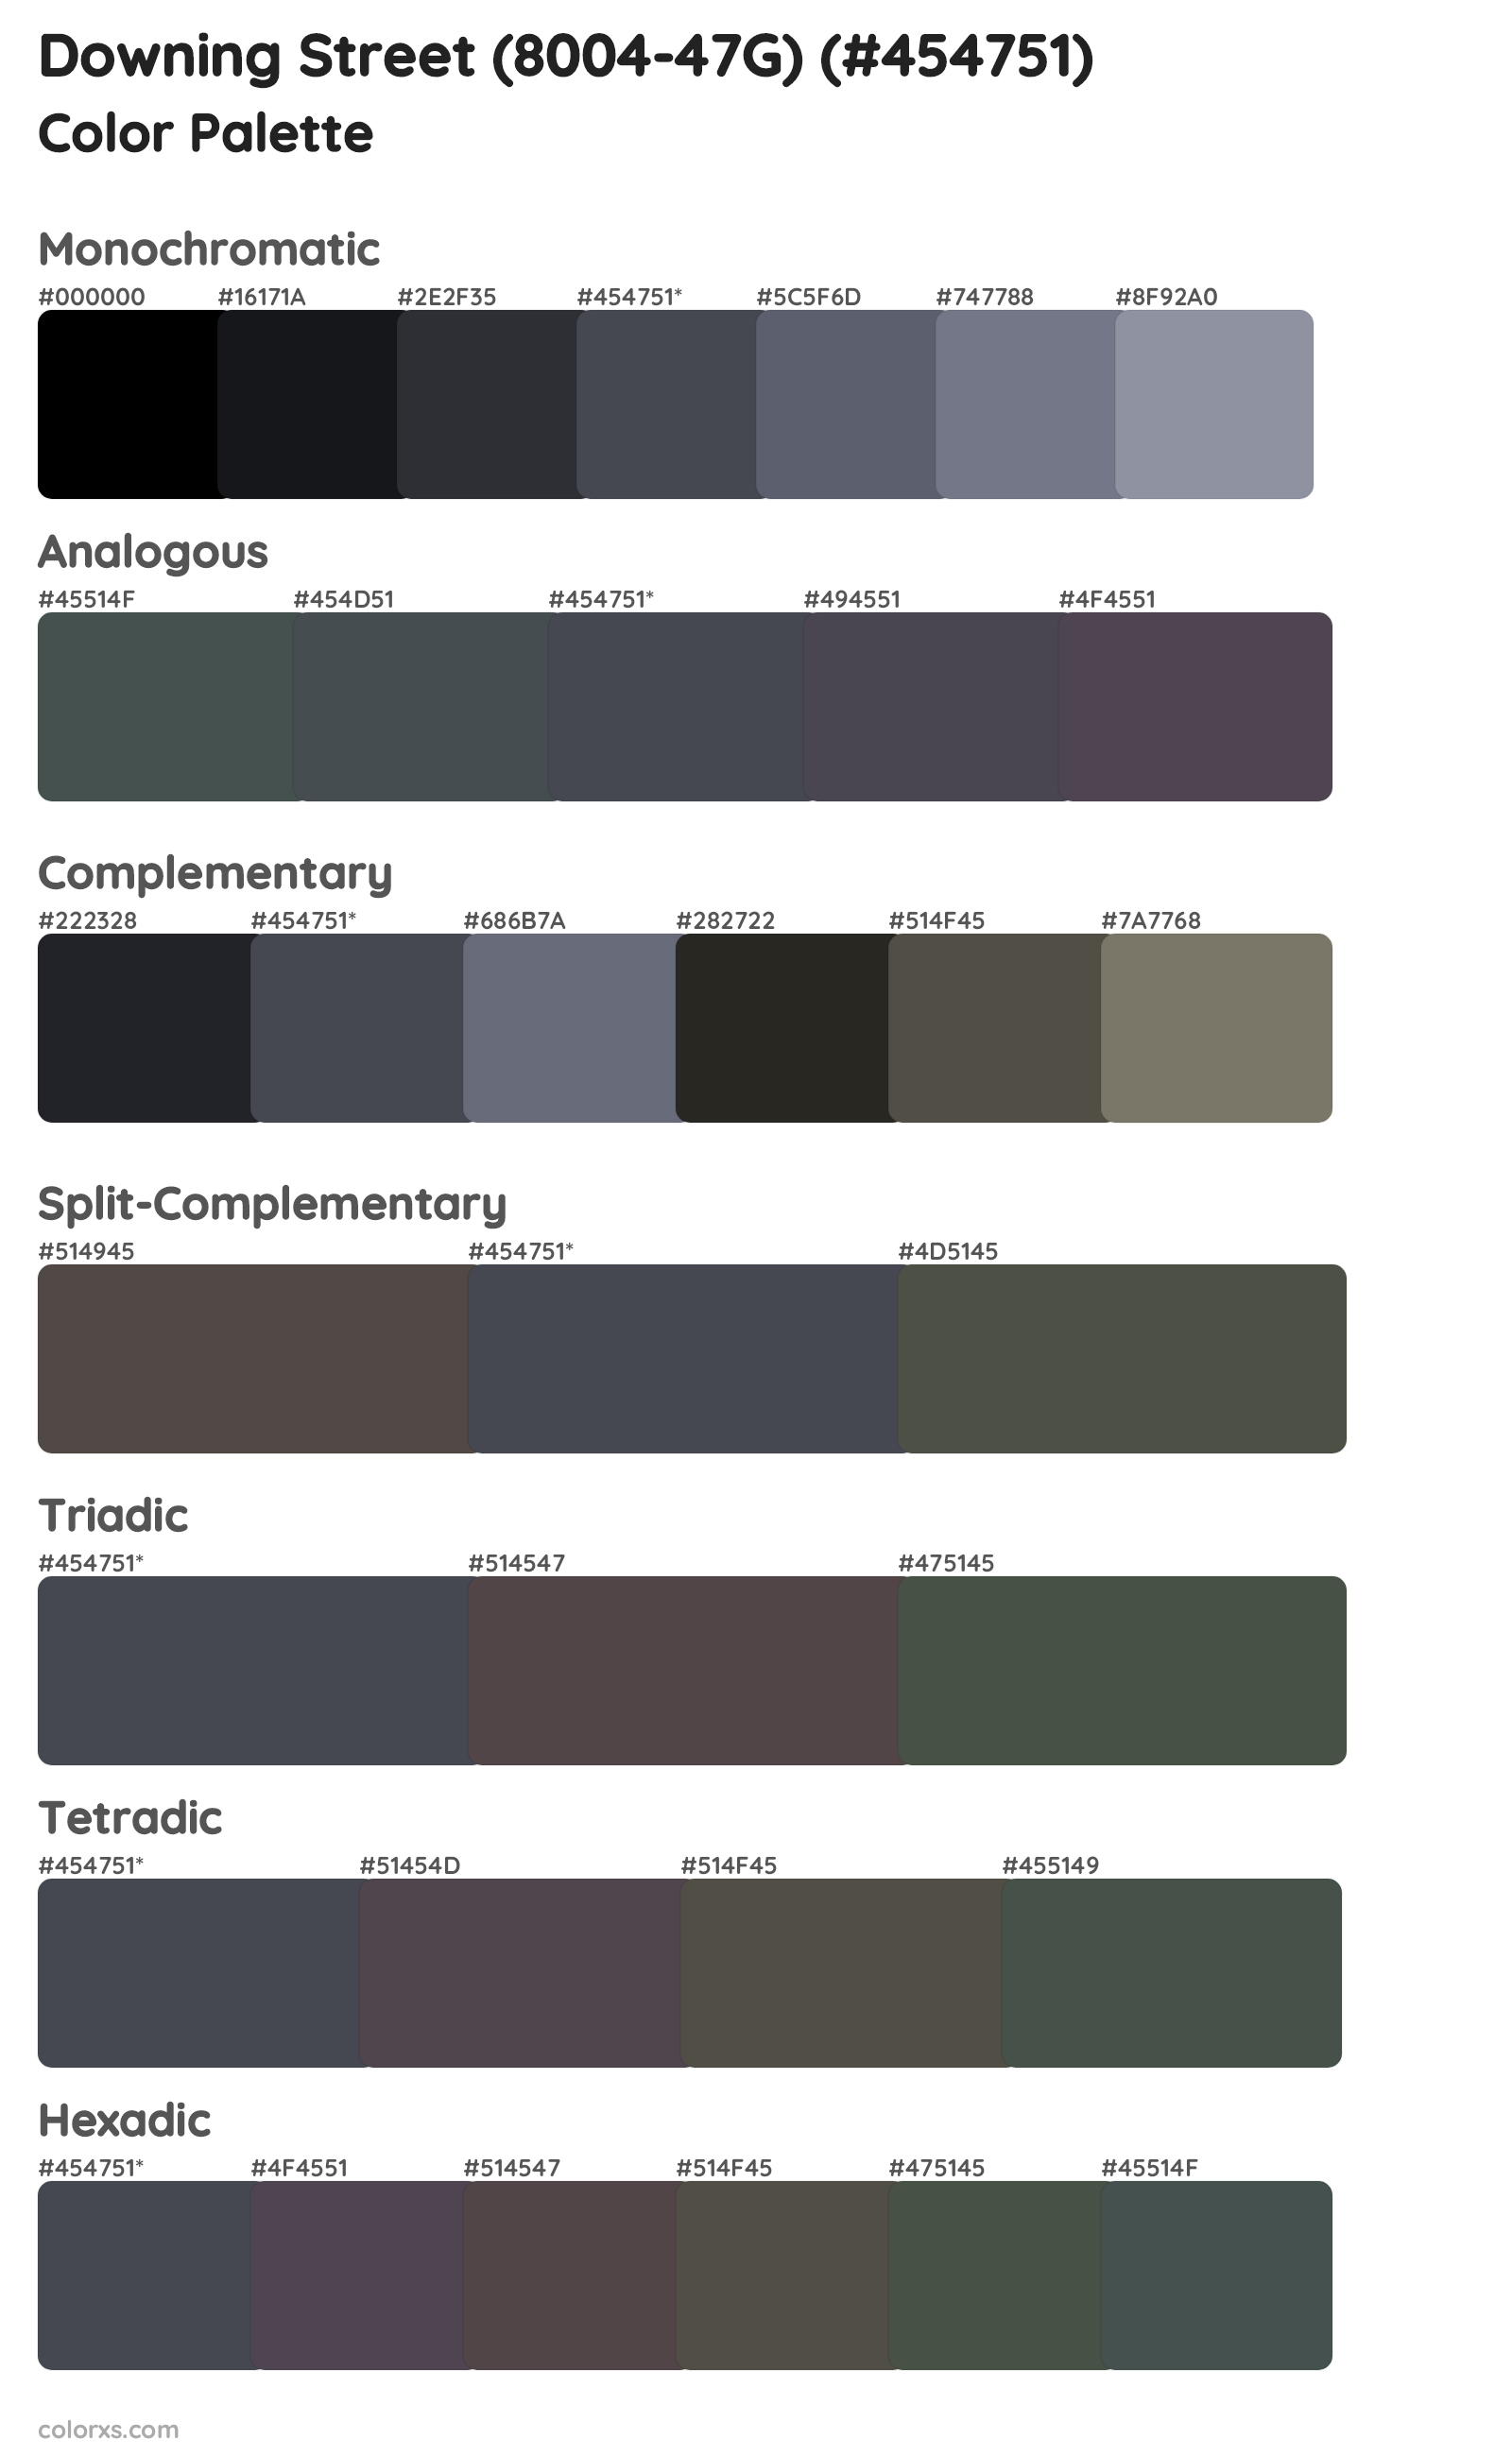 Downing Street (8004-47G) Color Scheme Palettes